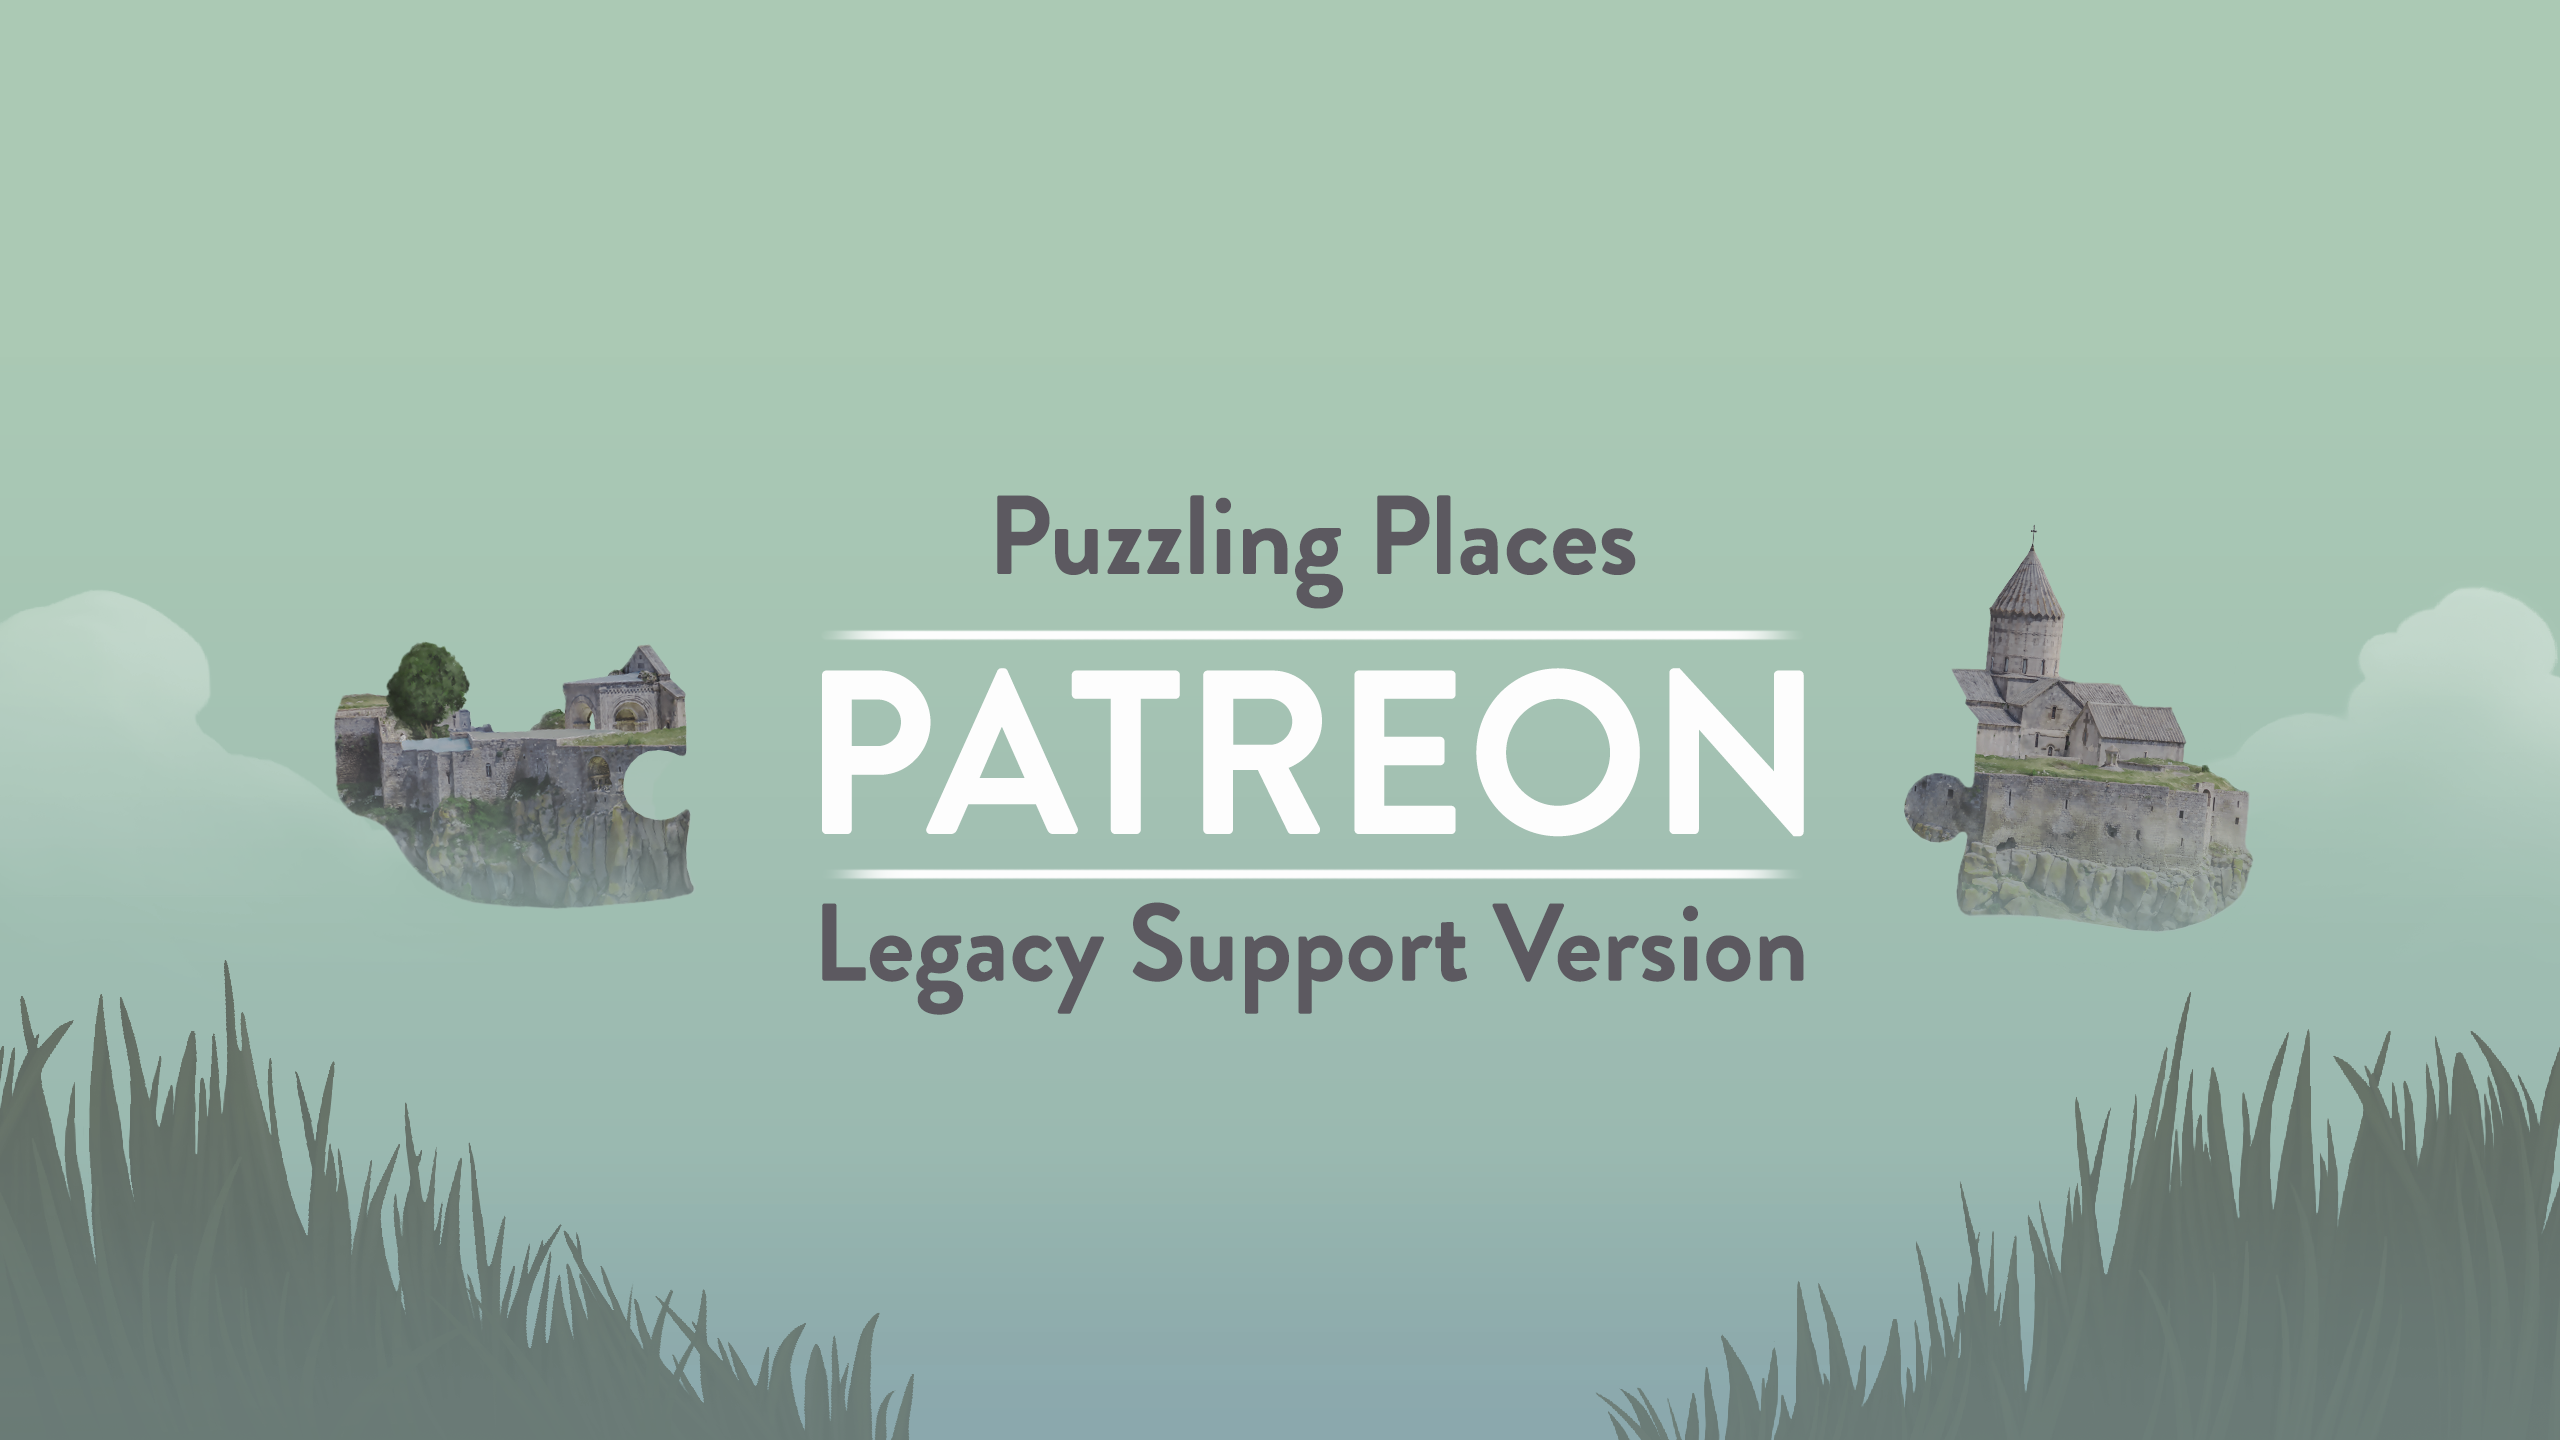 Puzzling Places: Patreon - Legacy Support